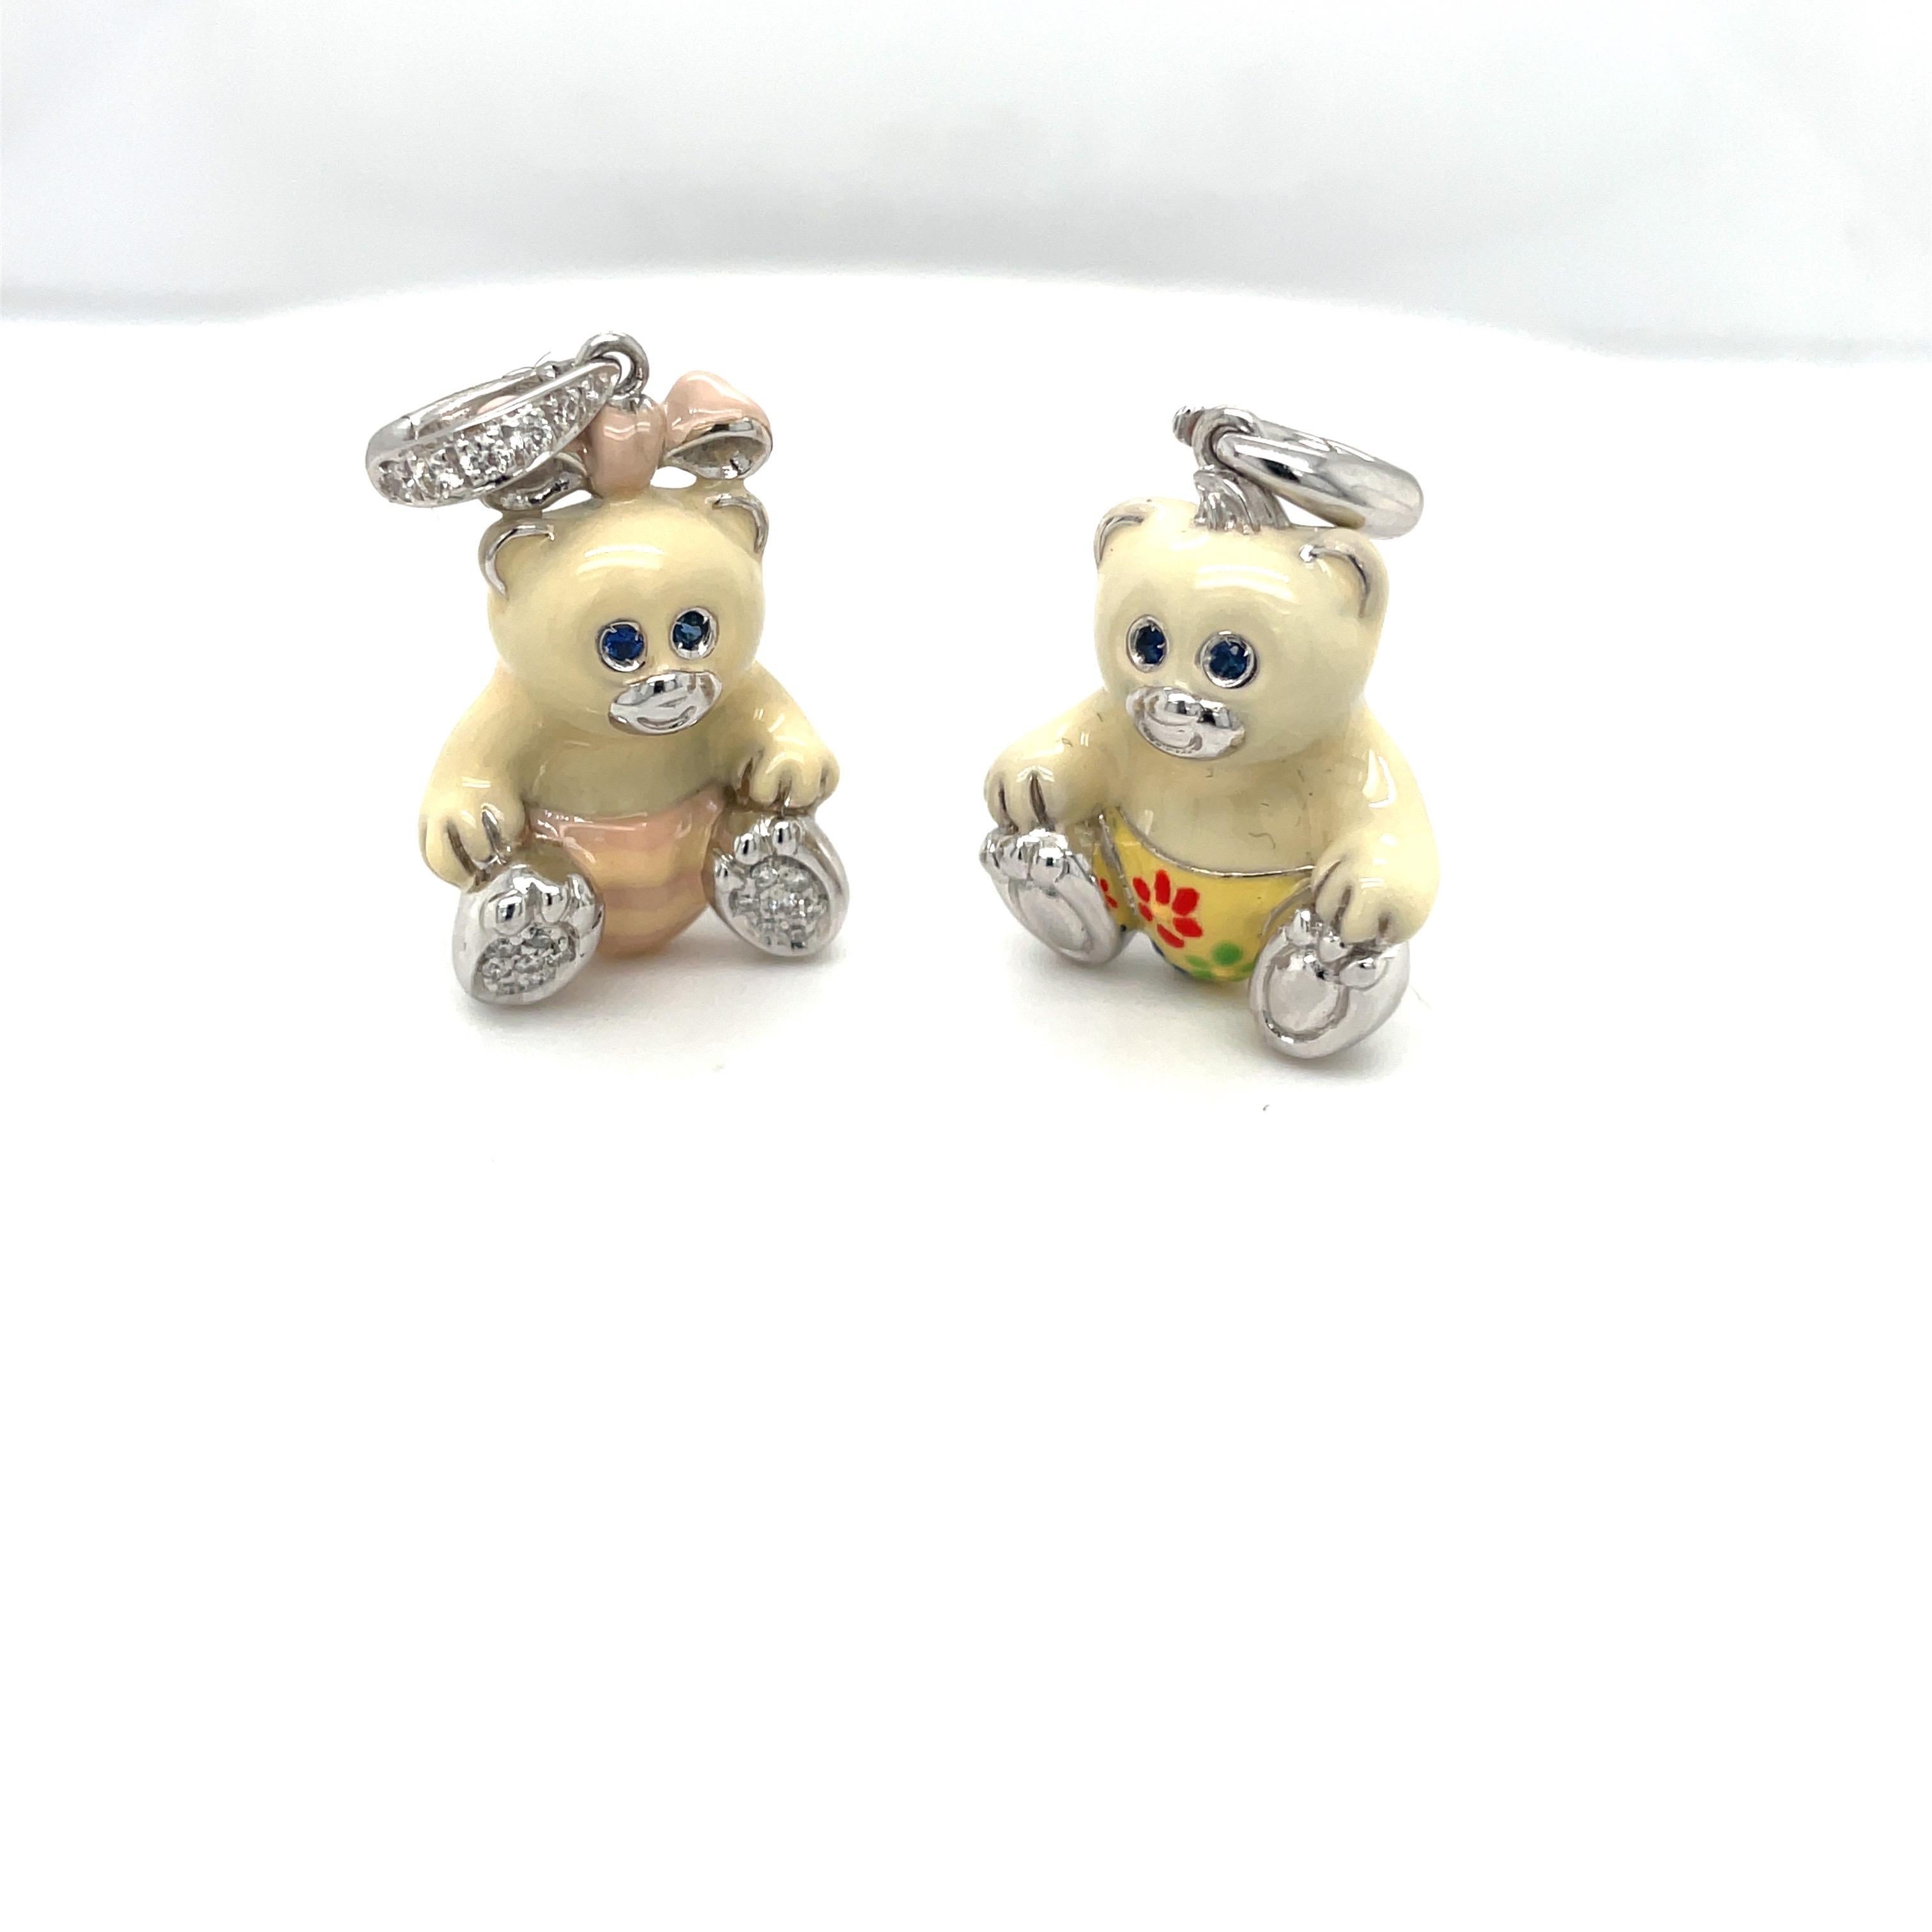 Just the cutest....Teddy bear charm made exclusively for Cellini by Ambrosi of Italy.

This 18 karat white gold teddy bear charm is crafted with a milky white enamel for the body. His outfit is a soft yellow with red, blue, and green flowers. He has